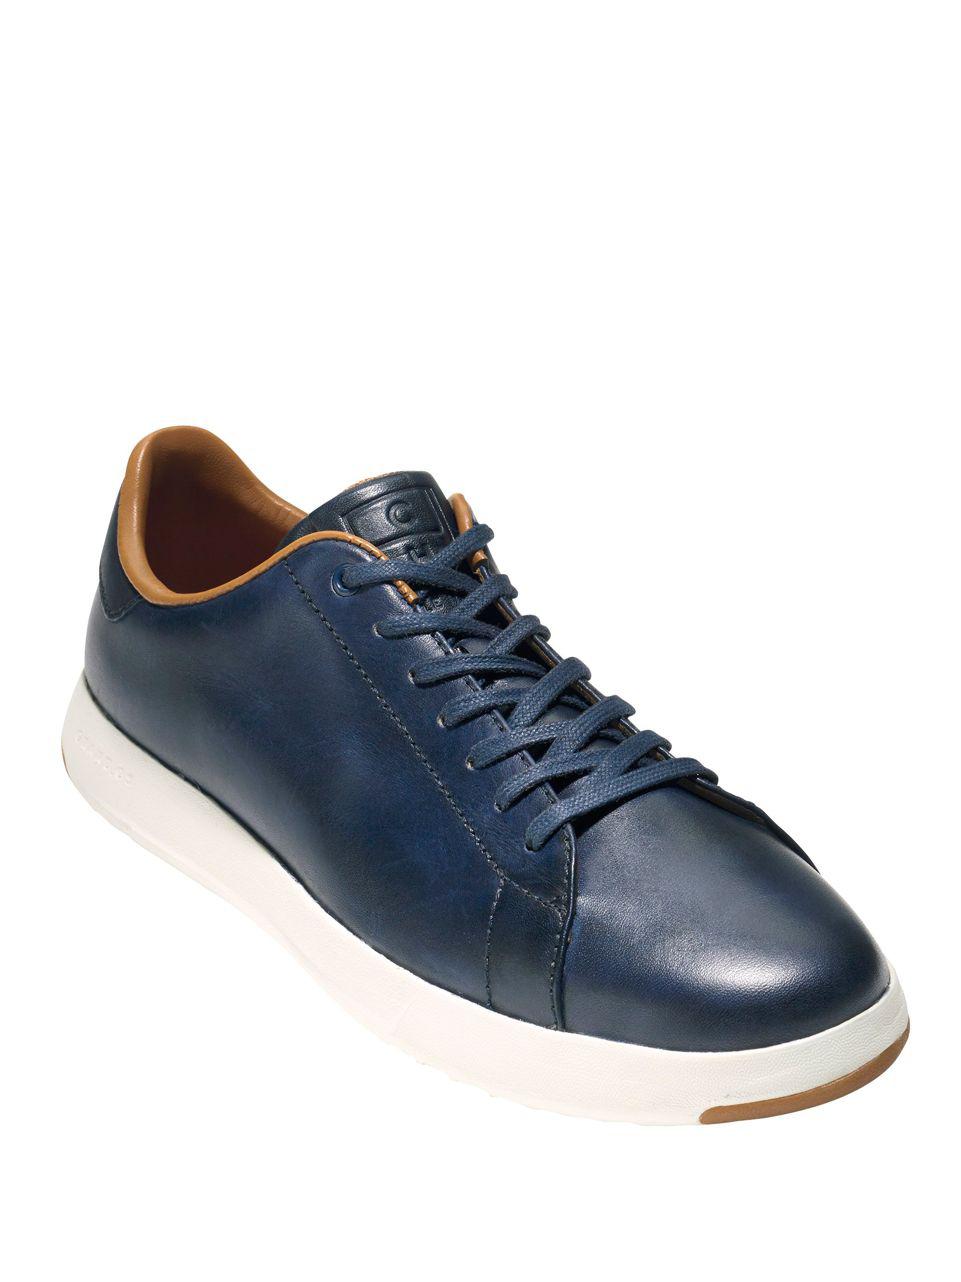 Lyst - Cole Haan Grandpro Tennis Sneakers in Blue for Men - Save 6%